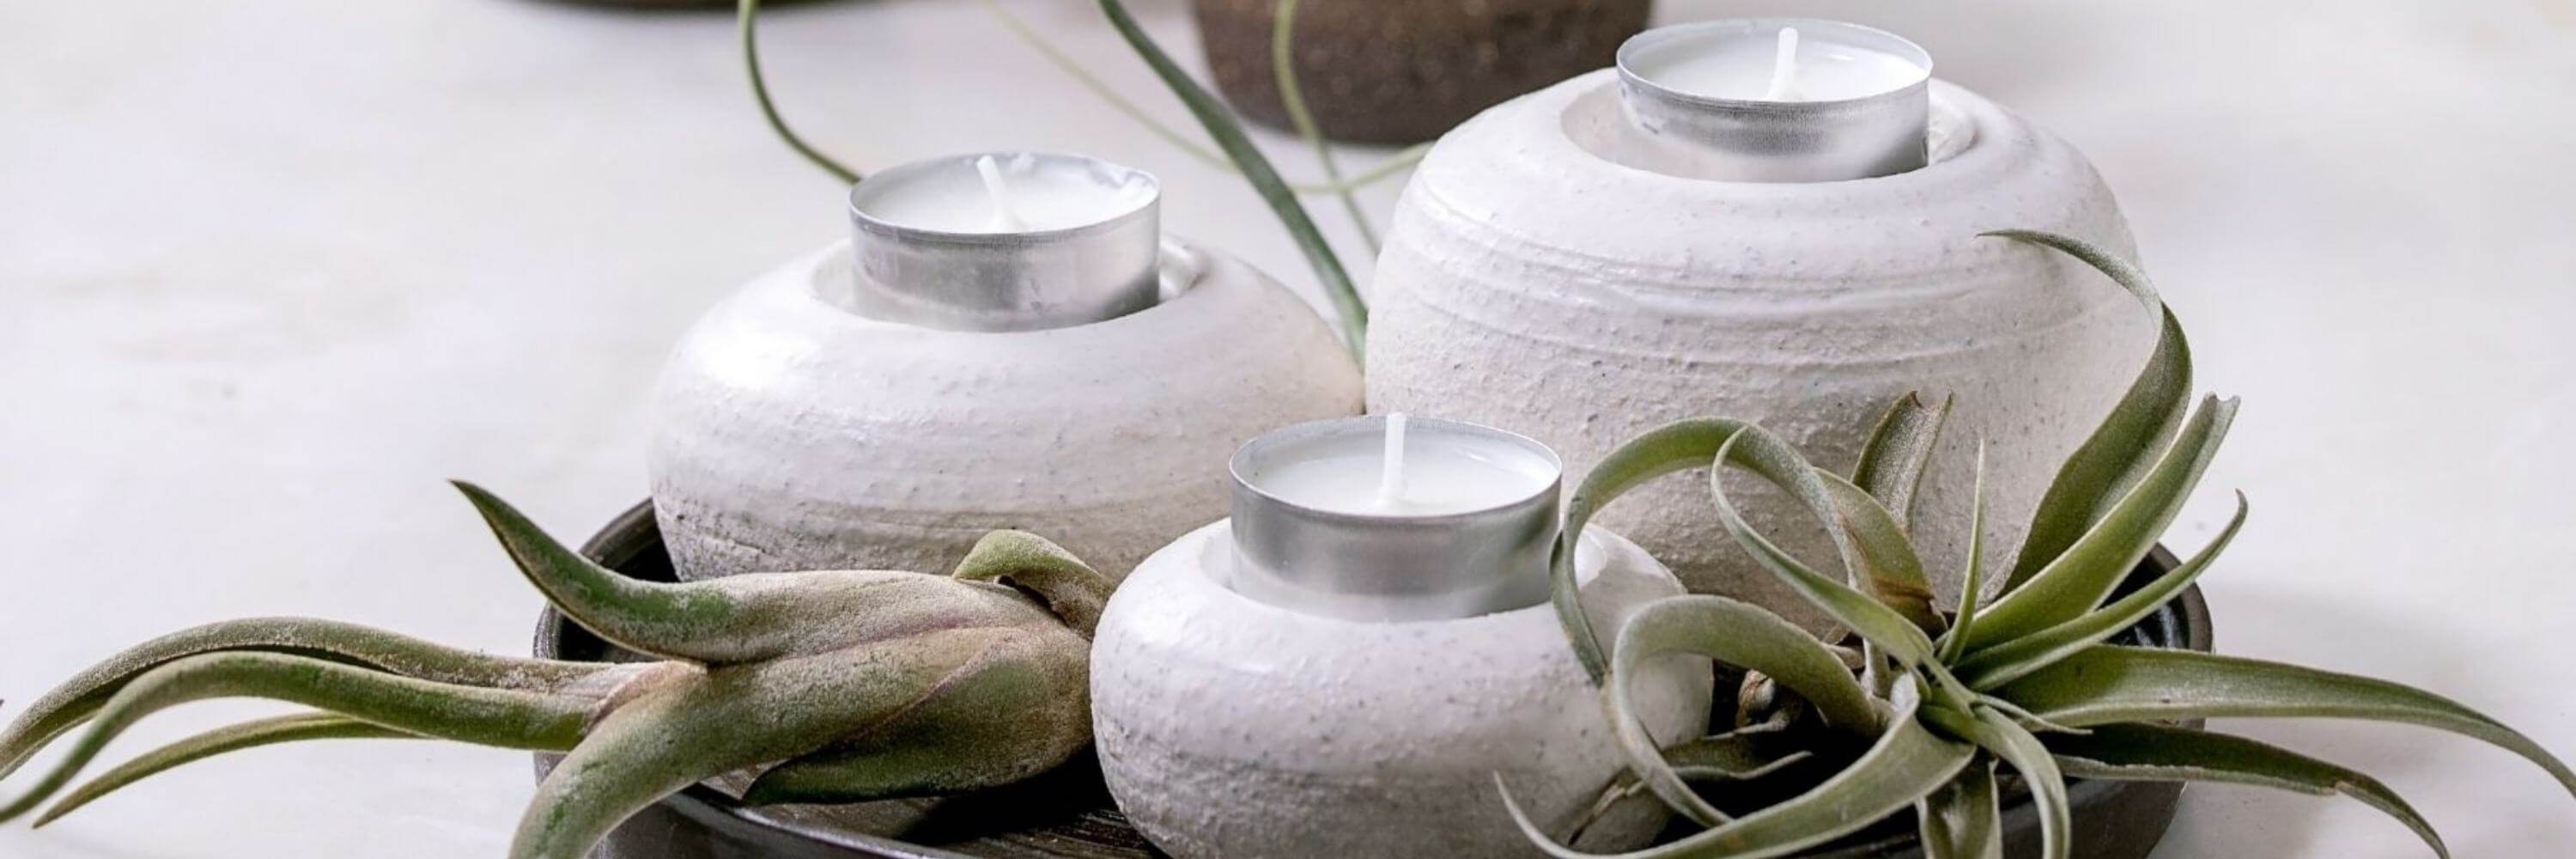 Three white textured candle holders on a wooden tray